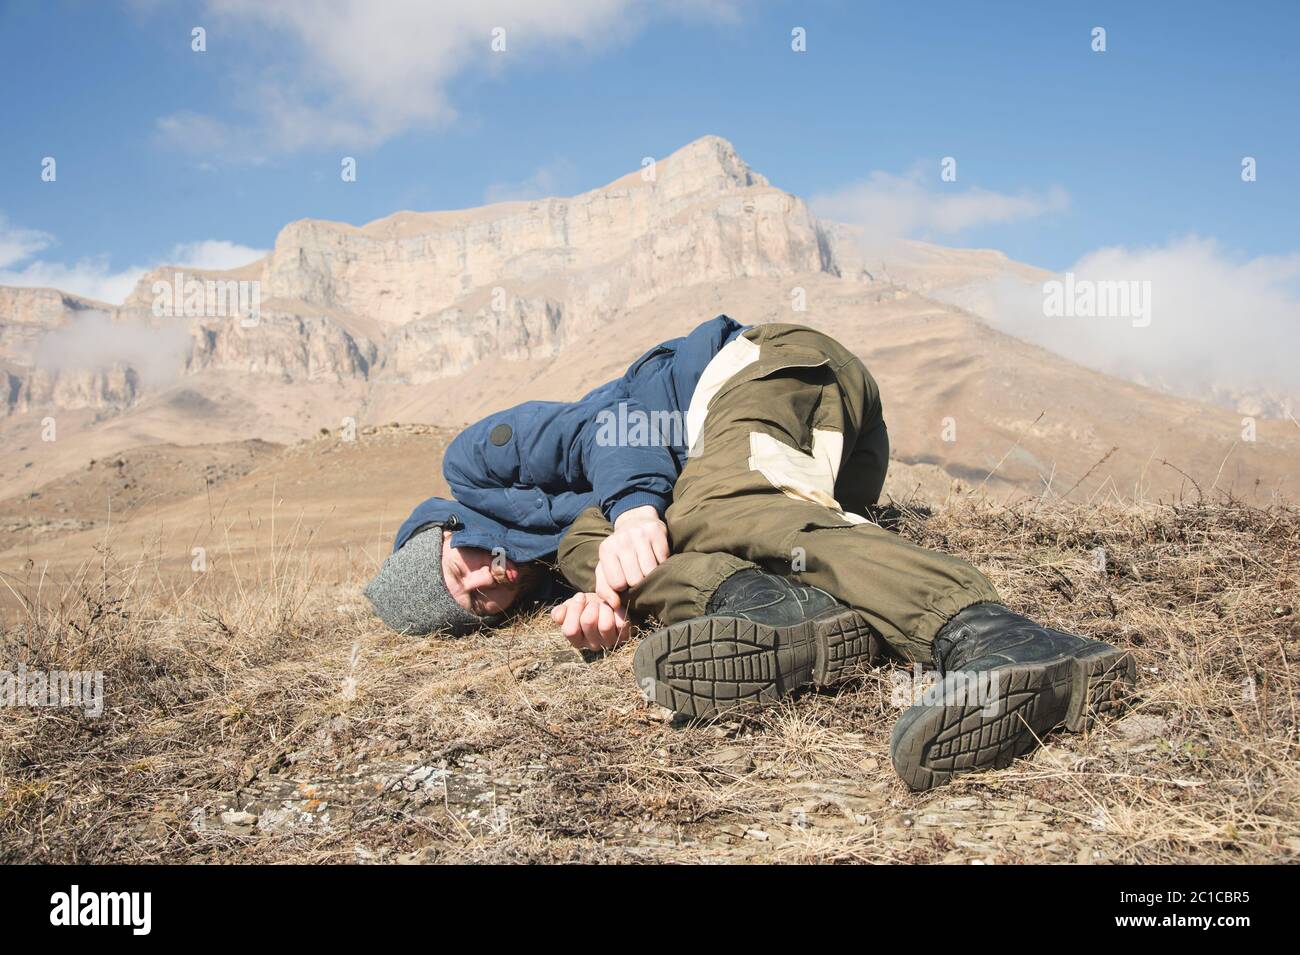 A tourist with a hat and a beard lies on the ground and feels bad in the mountains. A person who has lost consciousness. Danger Stock Photo